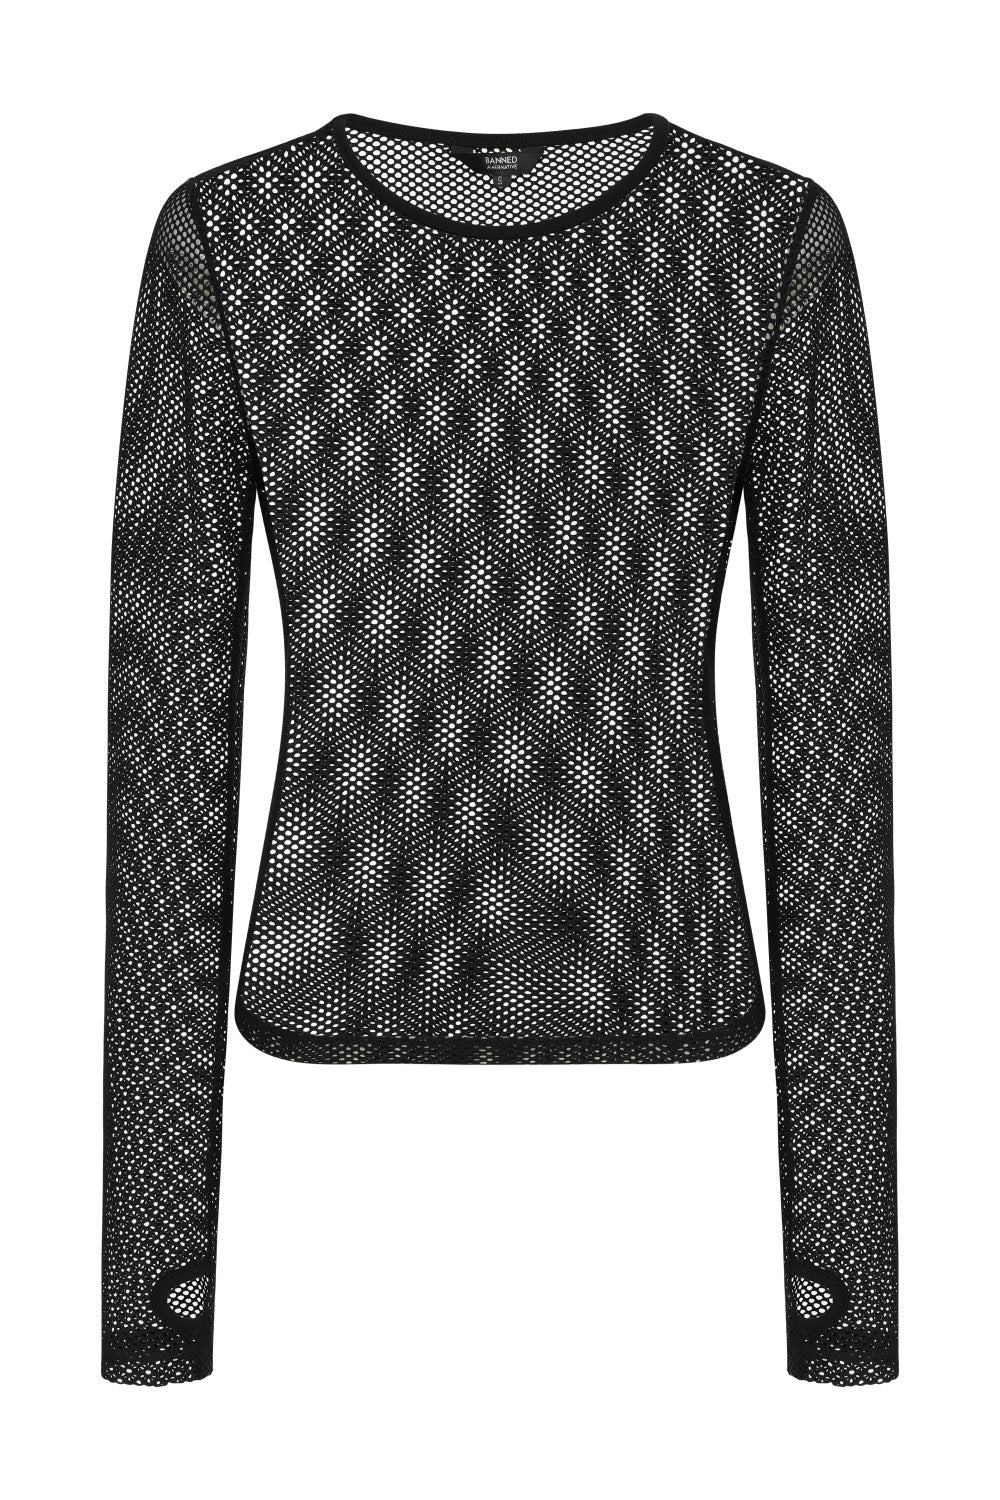 Banned Alternative Lilith Long Sleeve Mesh Top